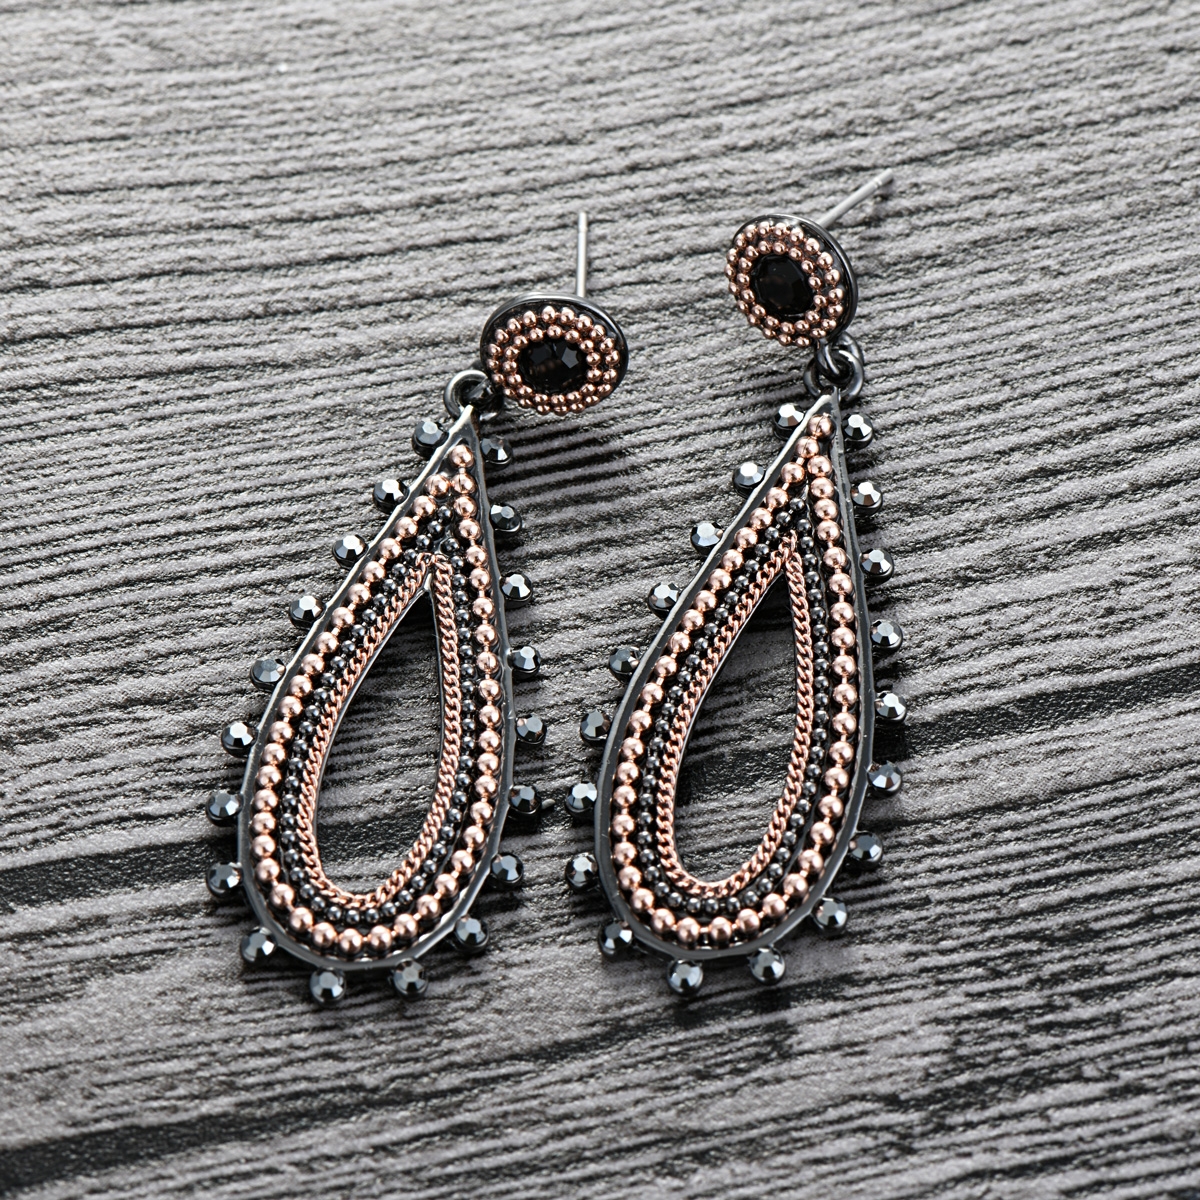 Low Cost Gunmetal Plated Black Dangle Earrings with Low Cost